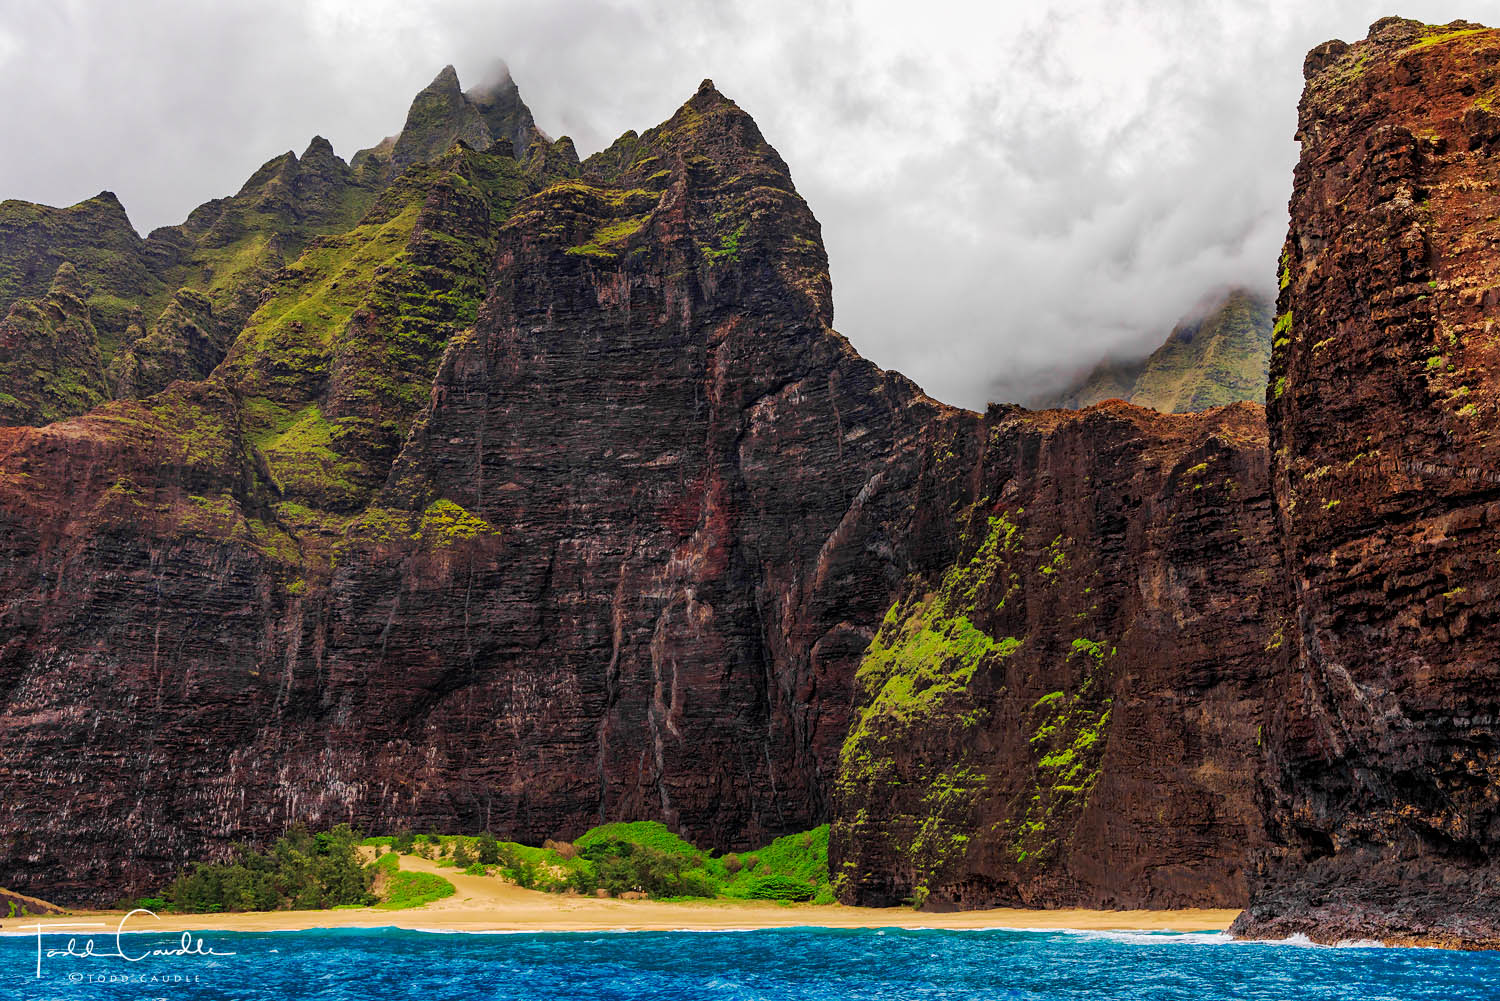 The wild Na Pali Coast and a very secluded beach.